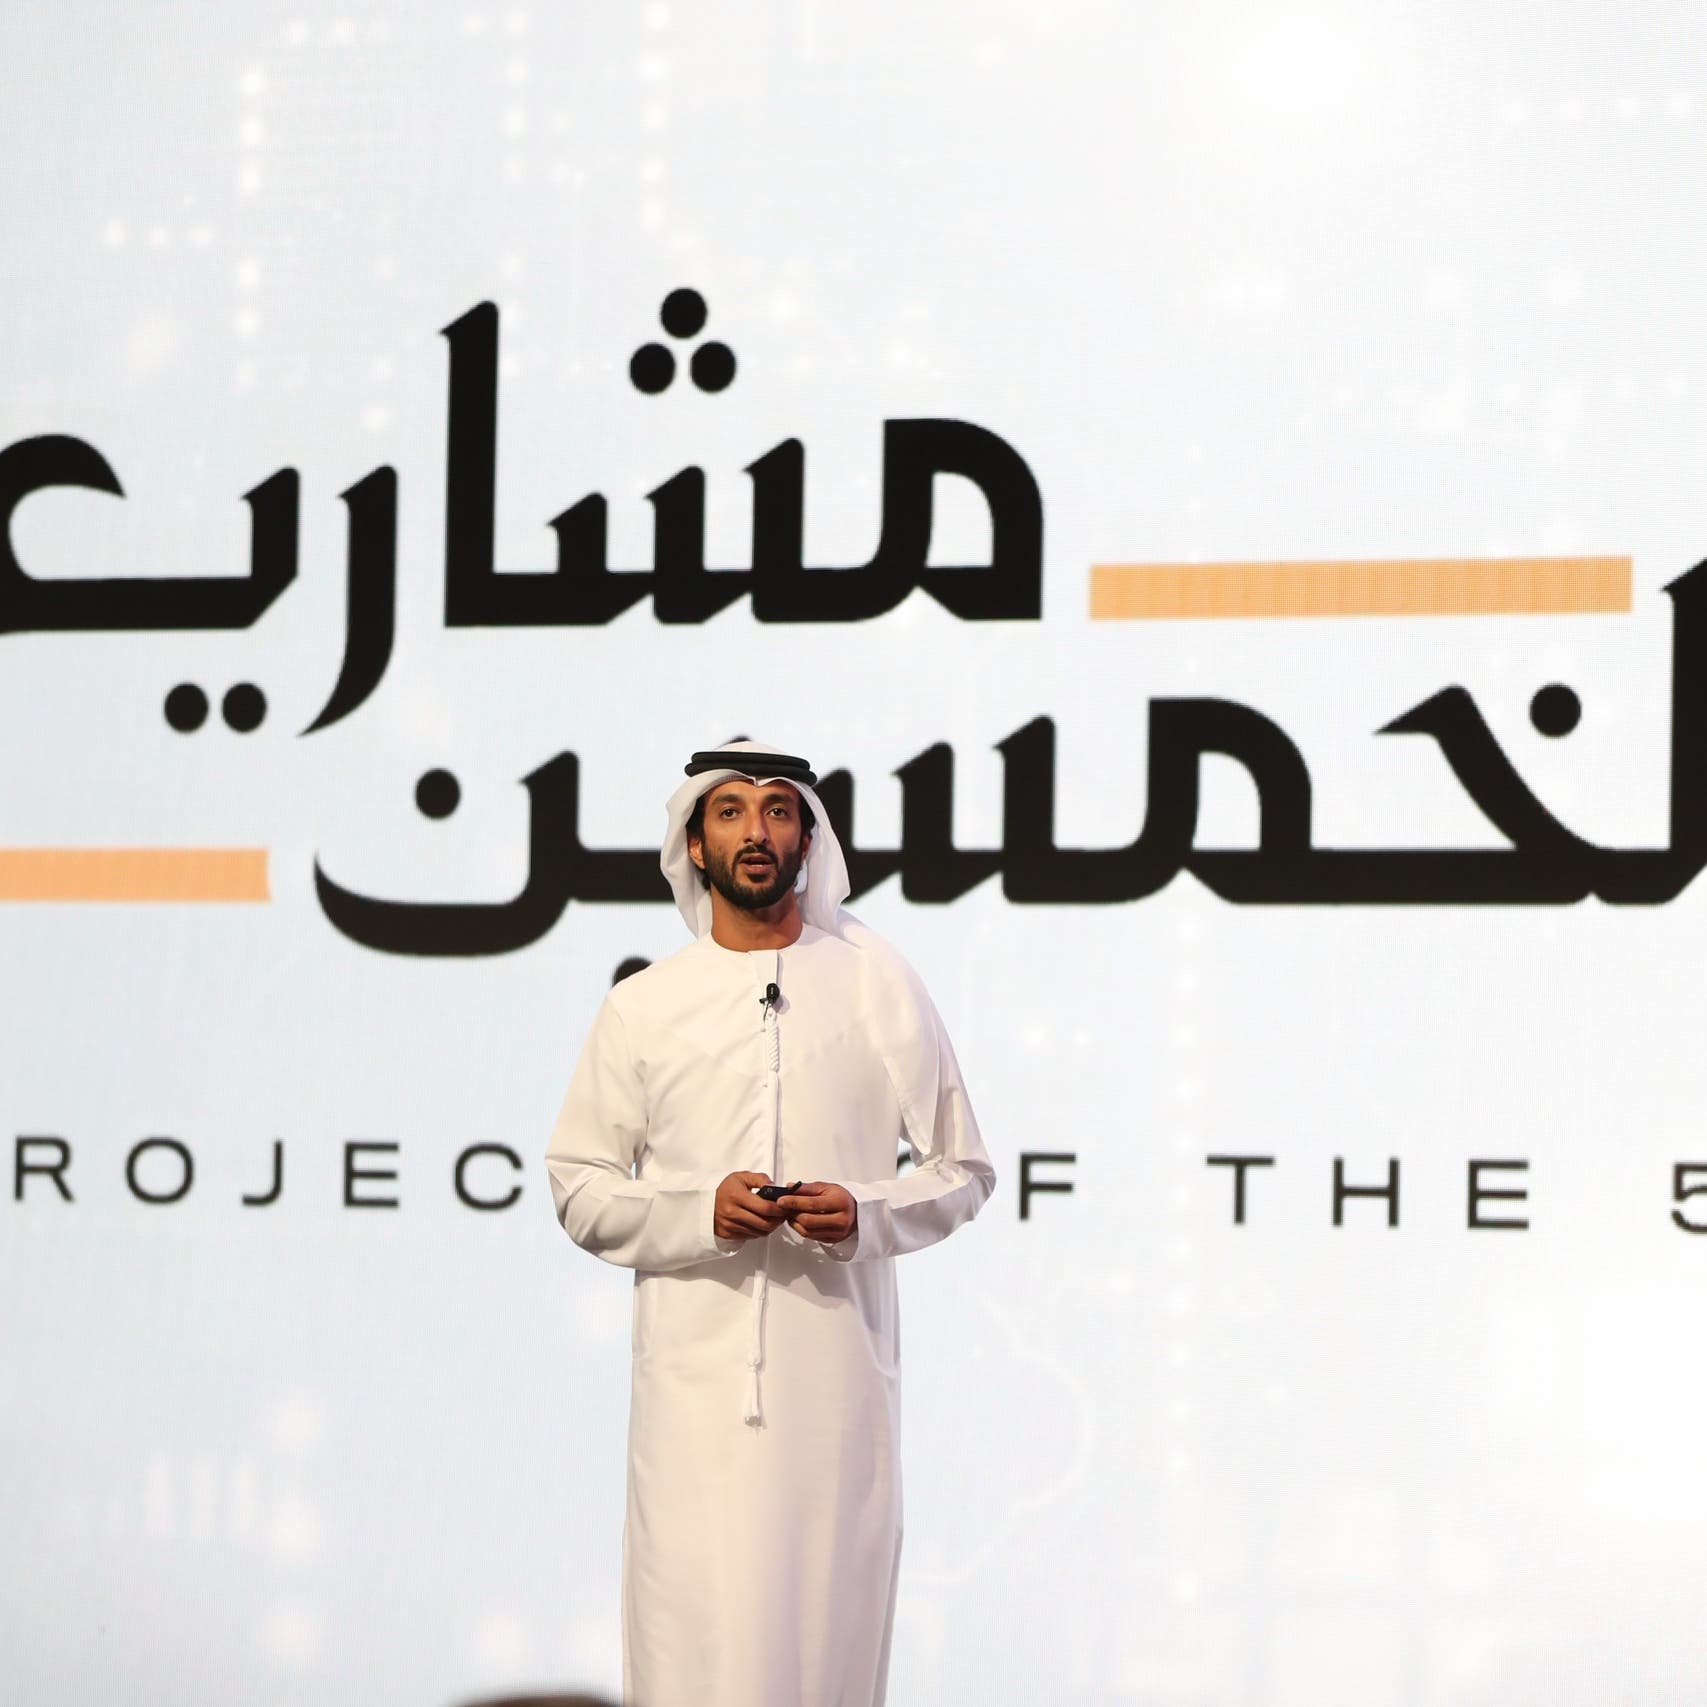 Here are some of the UAE’s ‘Projects of the 50’ initiatives unveiled so far